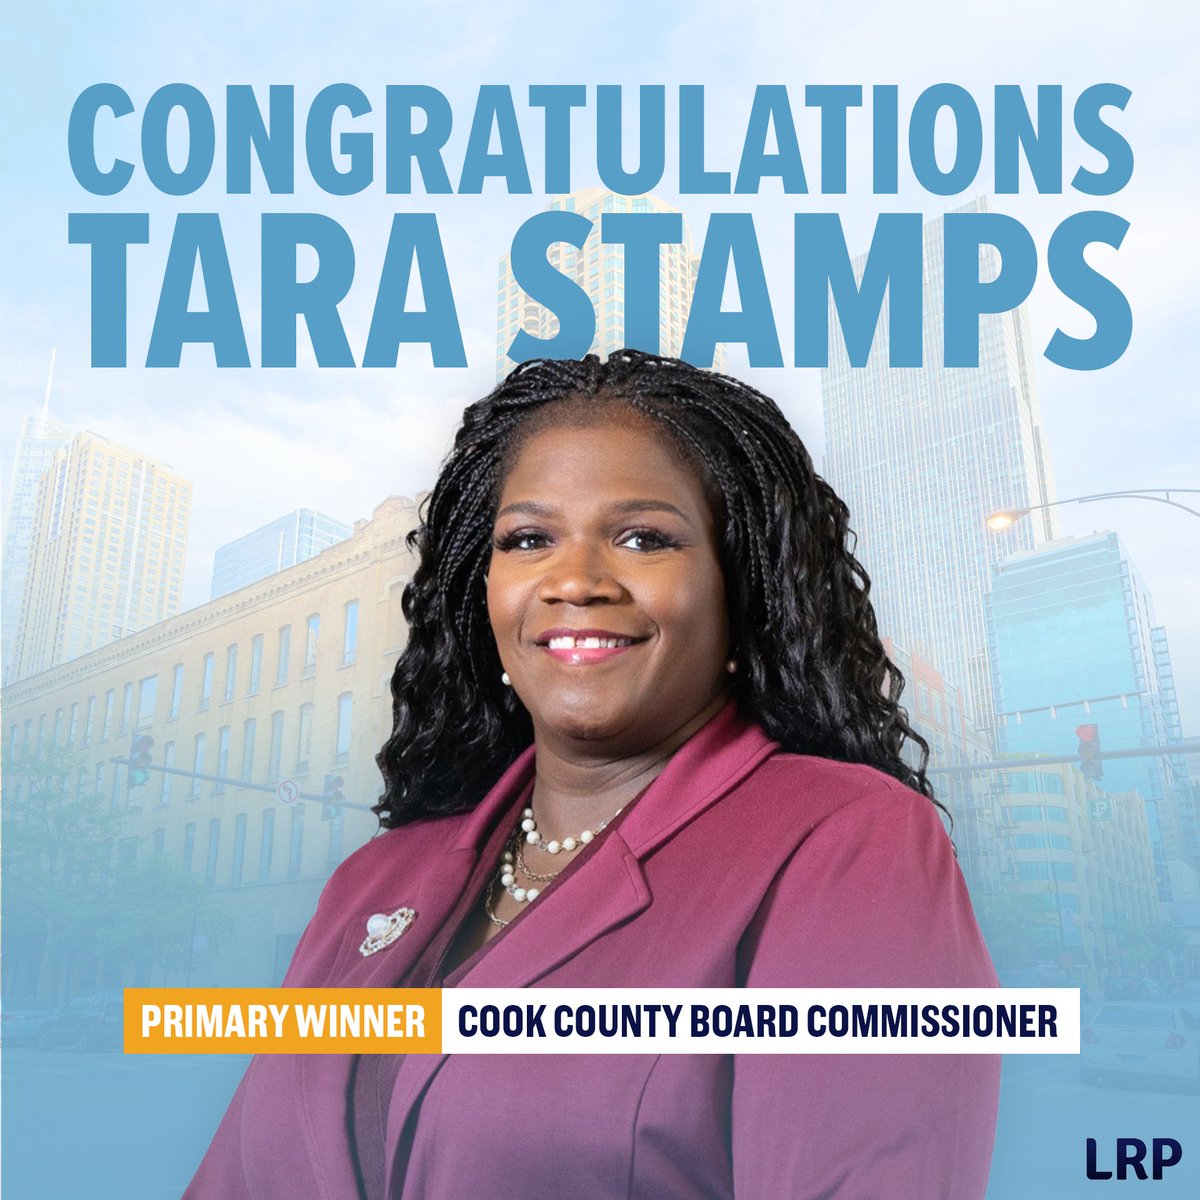 LRP congratulates two of our Illinois clients who won primary elections last night: community leader Graciela Guzmán for IL-20 State Senator and teacher and CTU member Tara Stamps for Cook County Board Commissioner. We are proud of these candidates' strong progressive values.